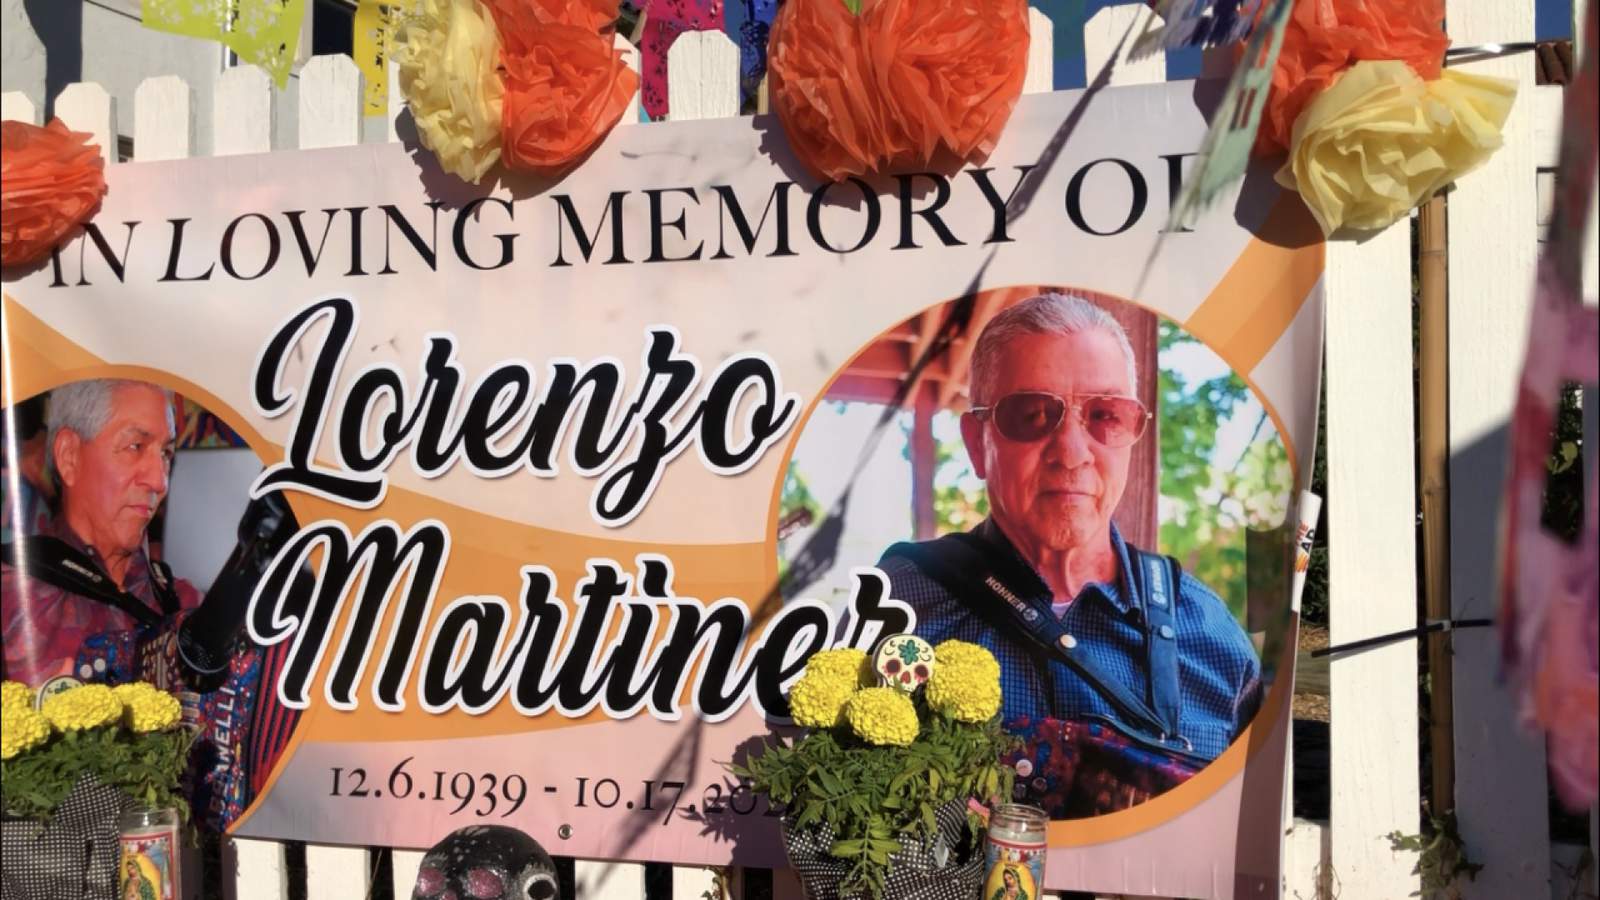 Day of the Dead altar offers healing for non-profit mourning recent death of accordionist, Lorenzo Martínez